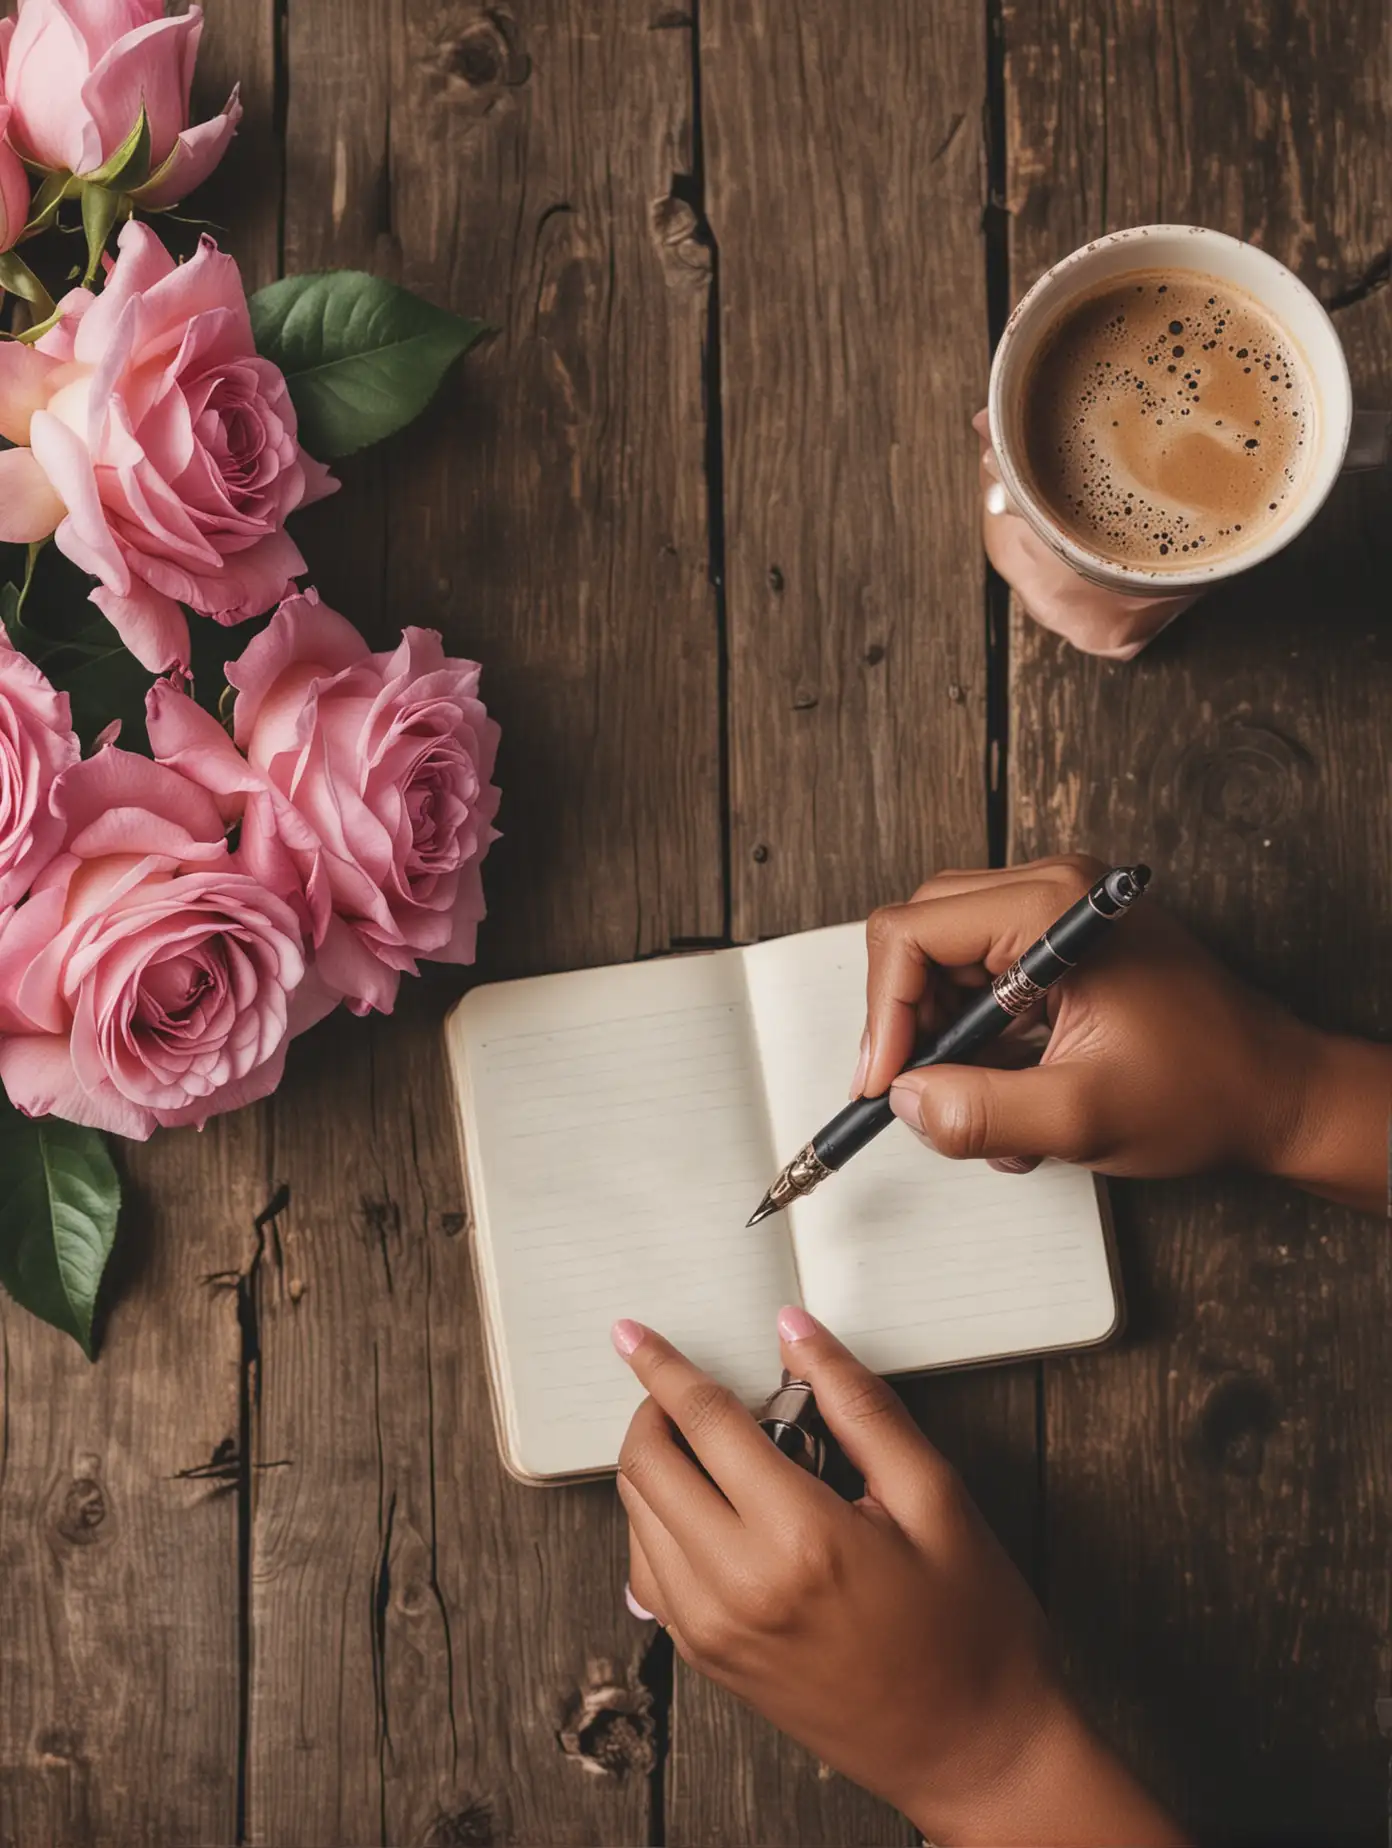 hands of a black women, holding a beautiful pen, writing in a blank journal, on top of a rustic wood table with pink roses, a cup of coffee